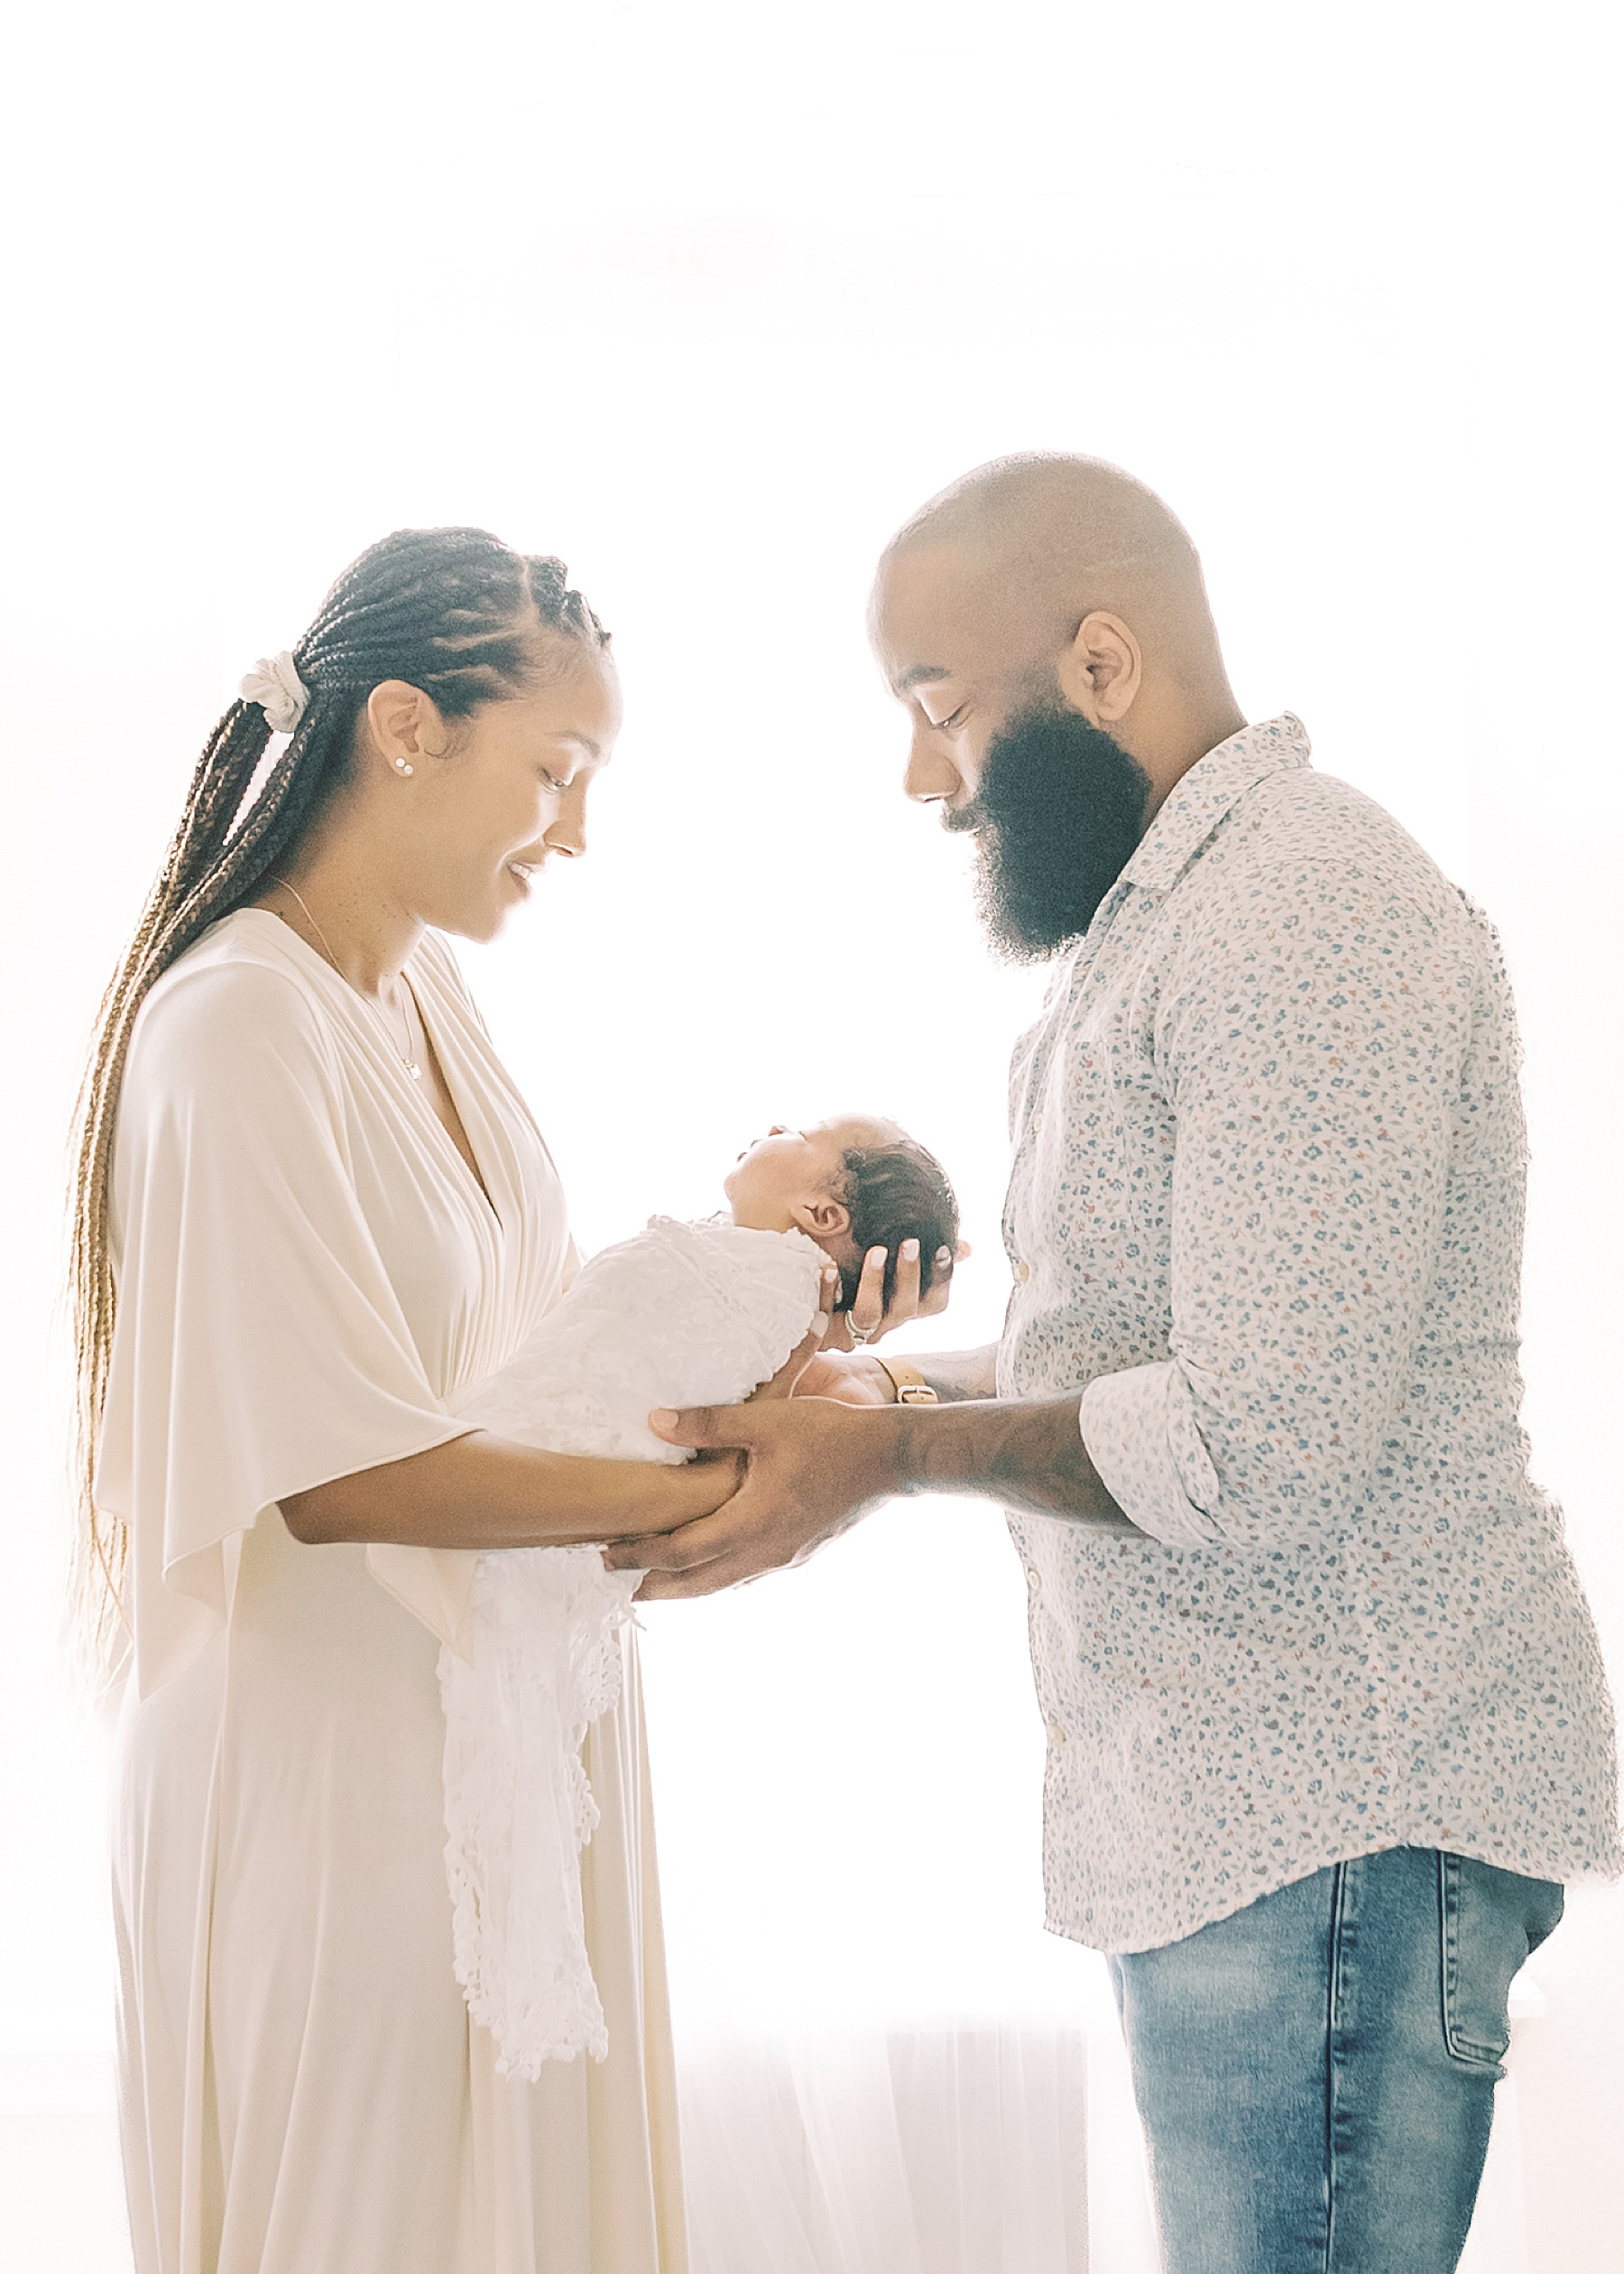 black man and black woman holding a newborn baby girl wrapped in a white lace wrap in front of an airy window